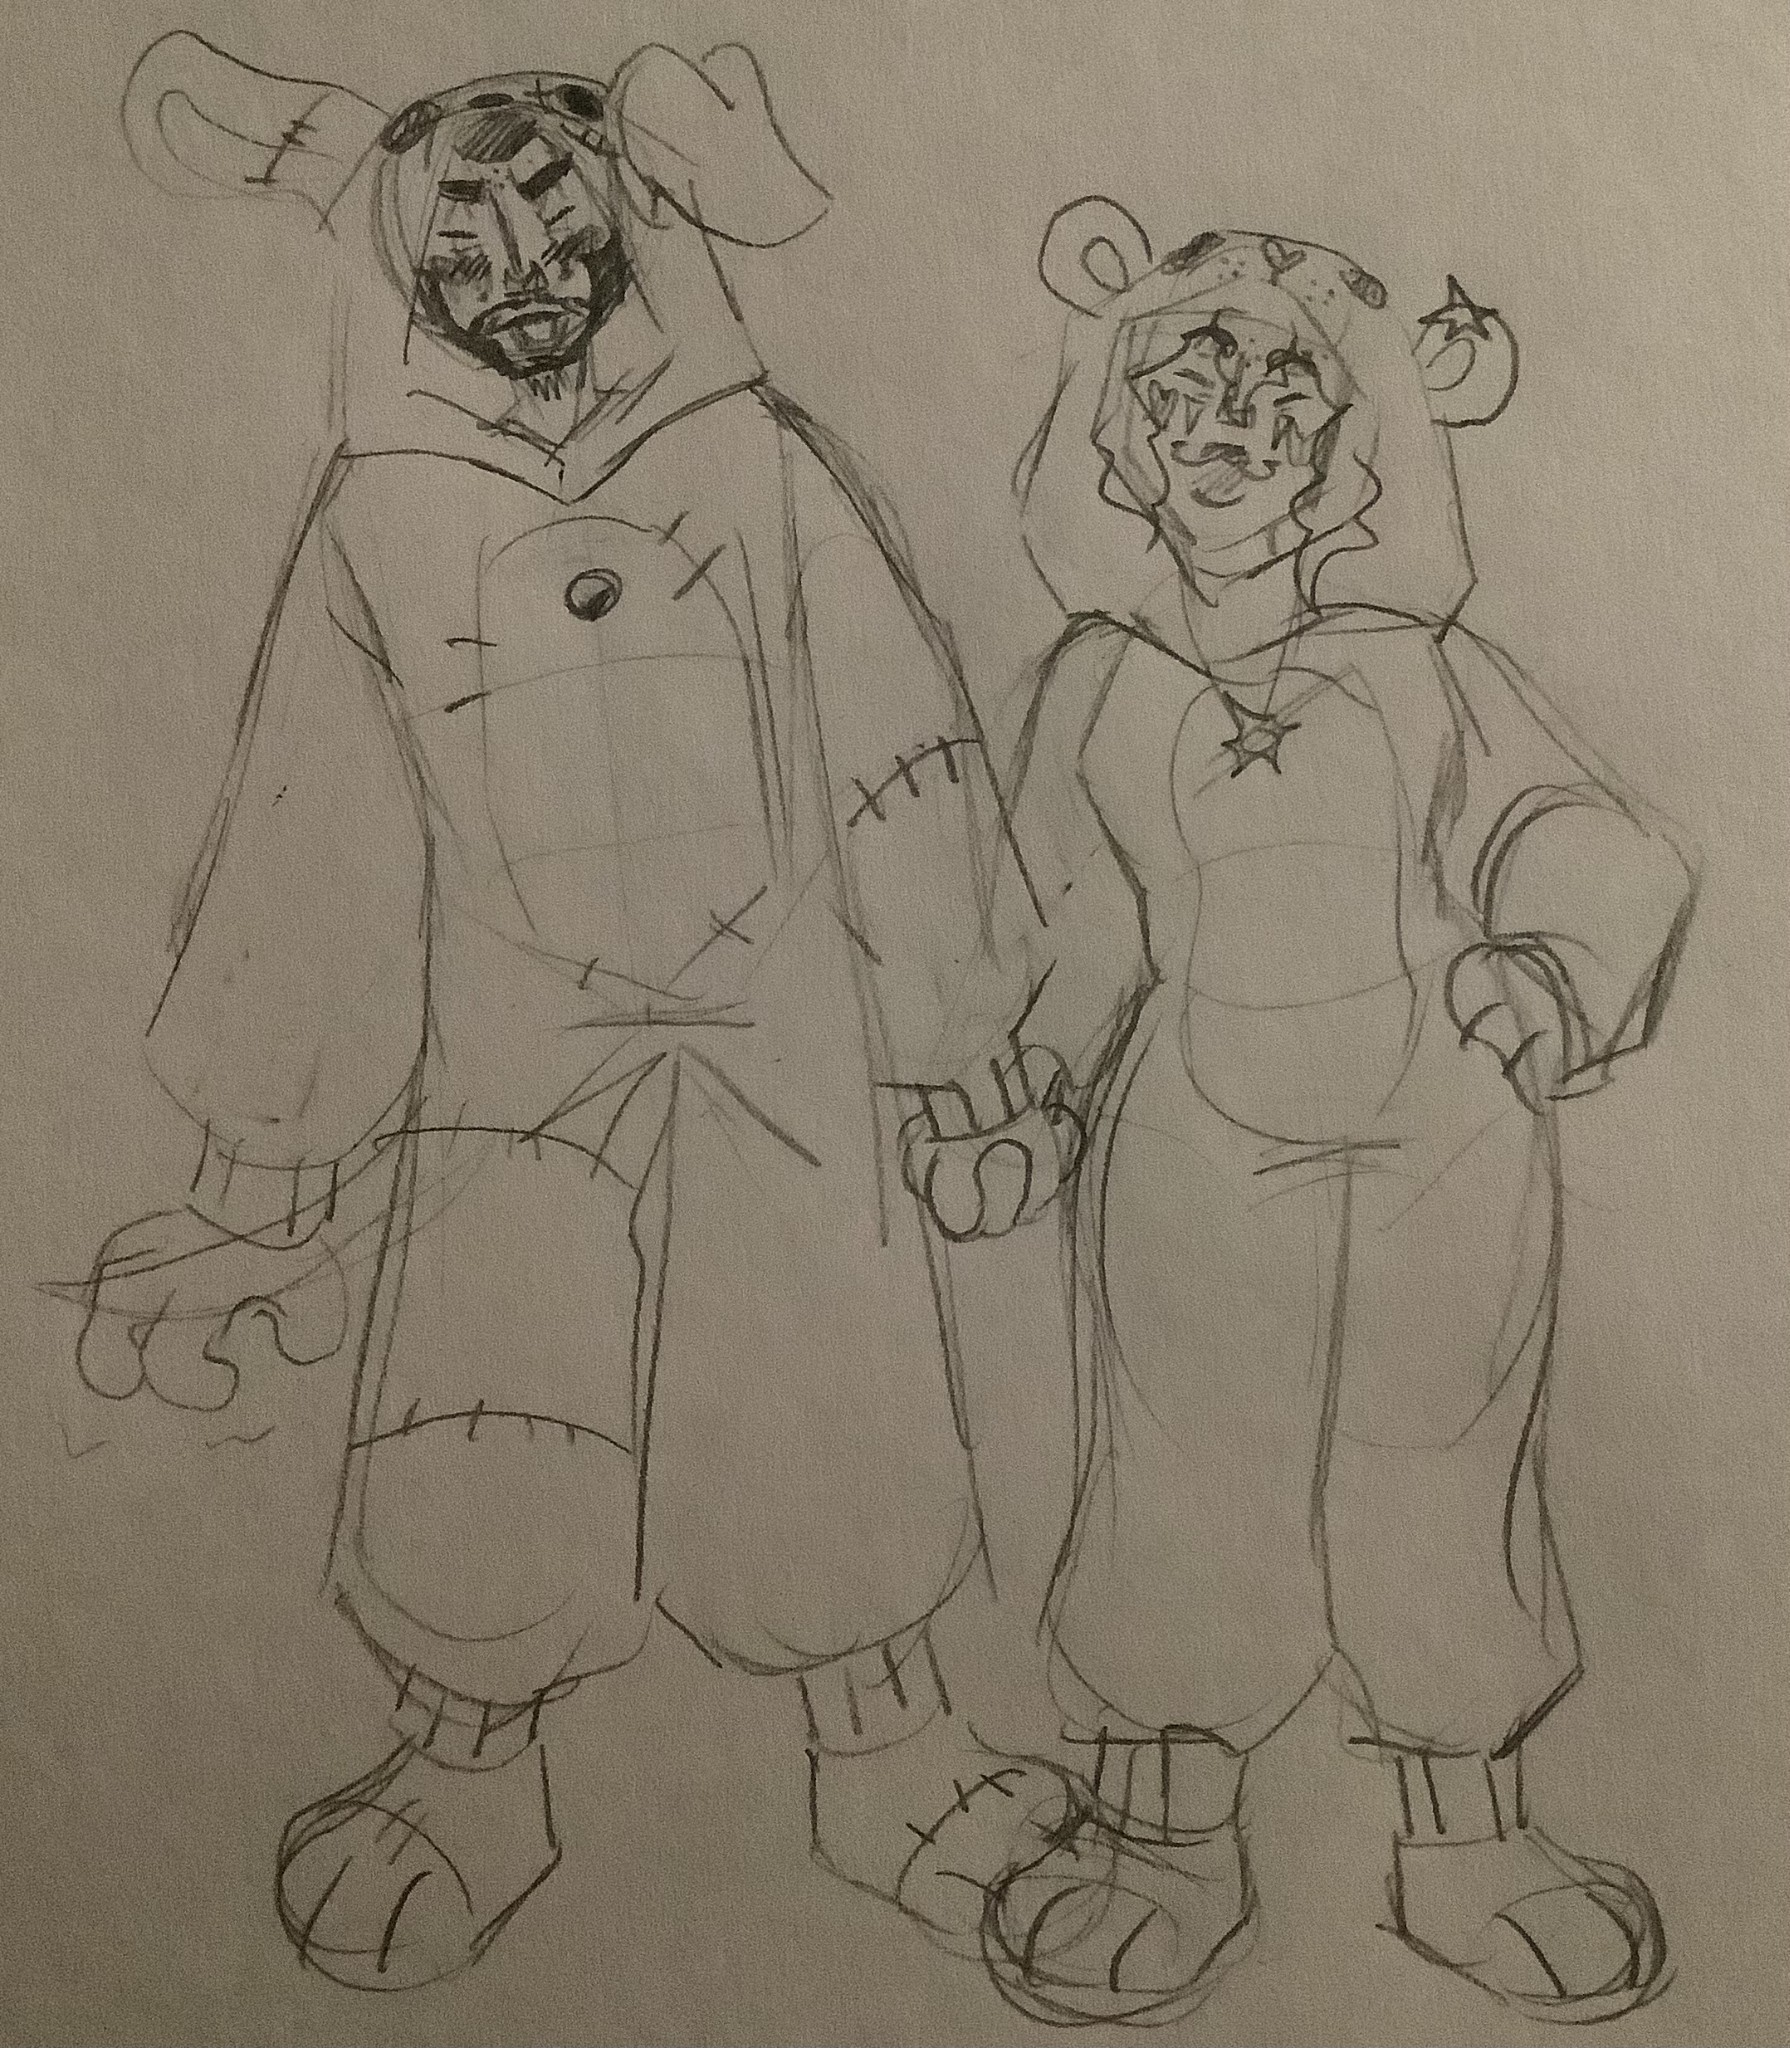 Martin GreyWhinder and Mari Faucher pose in their onesies (Harmony and Horror)